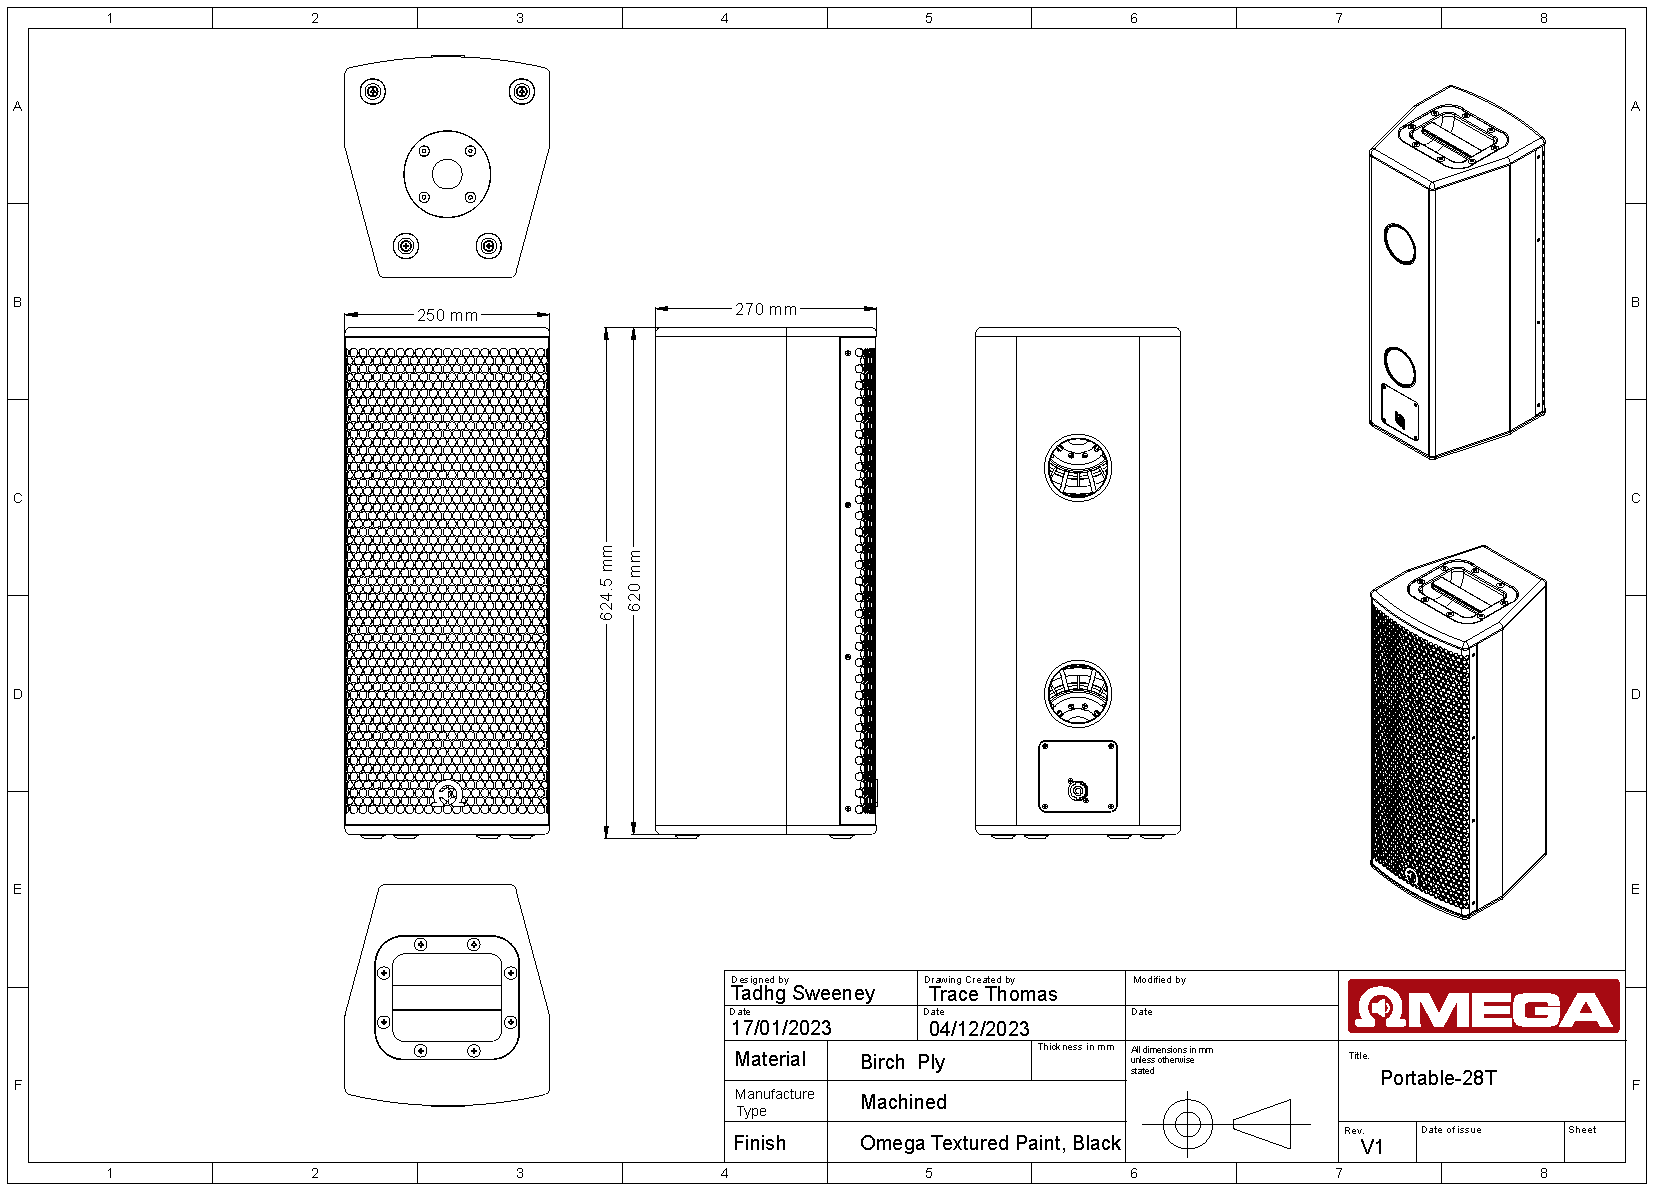 Portable-28T Drawing of speaker cabinet